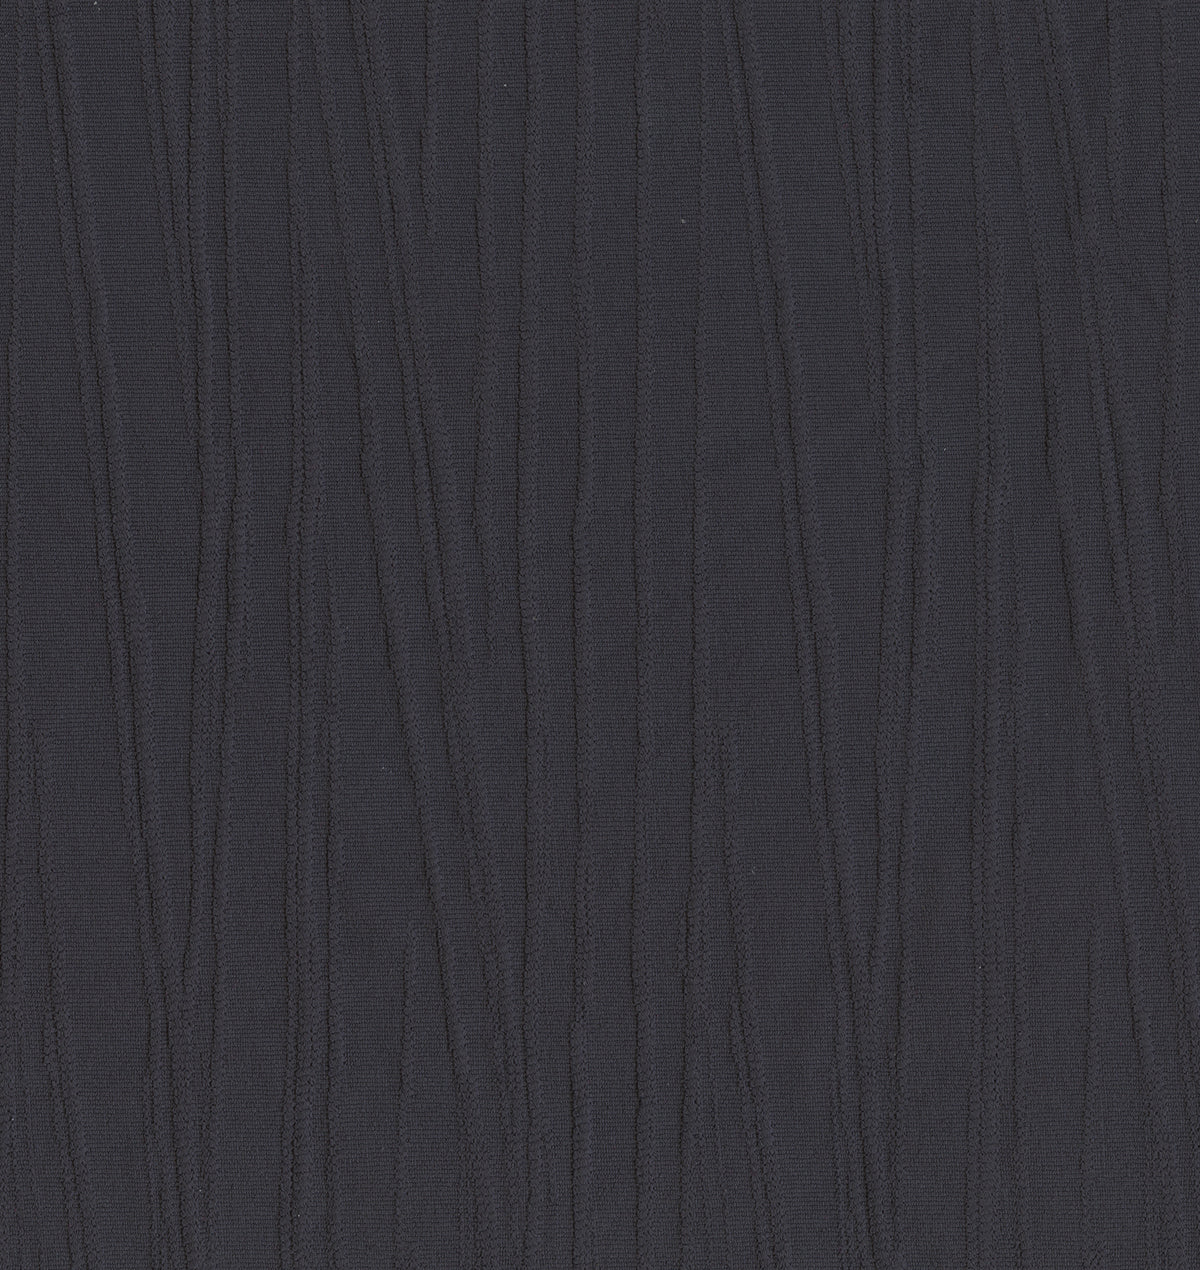 Sunsets Slate Seagrass Texture print with an marine seaweed texture on slate gray